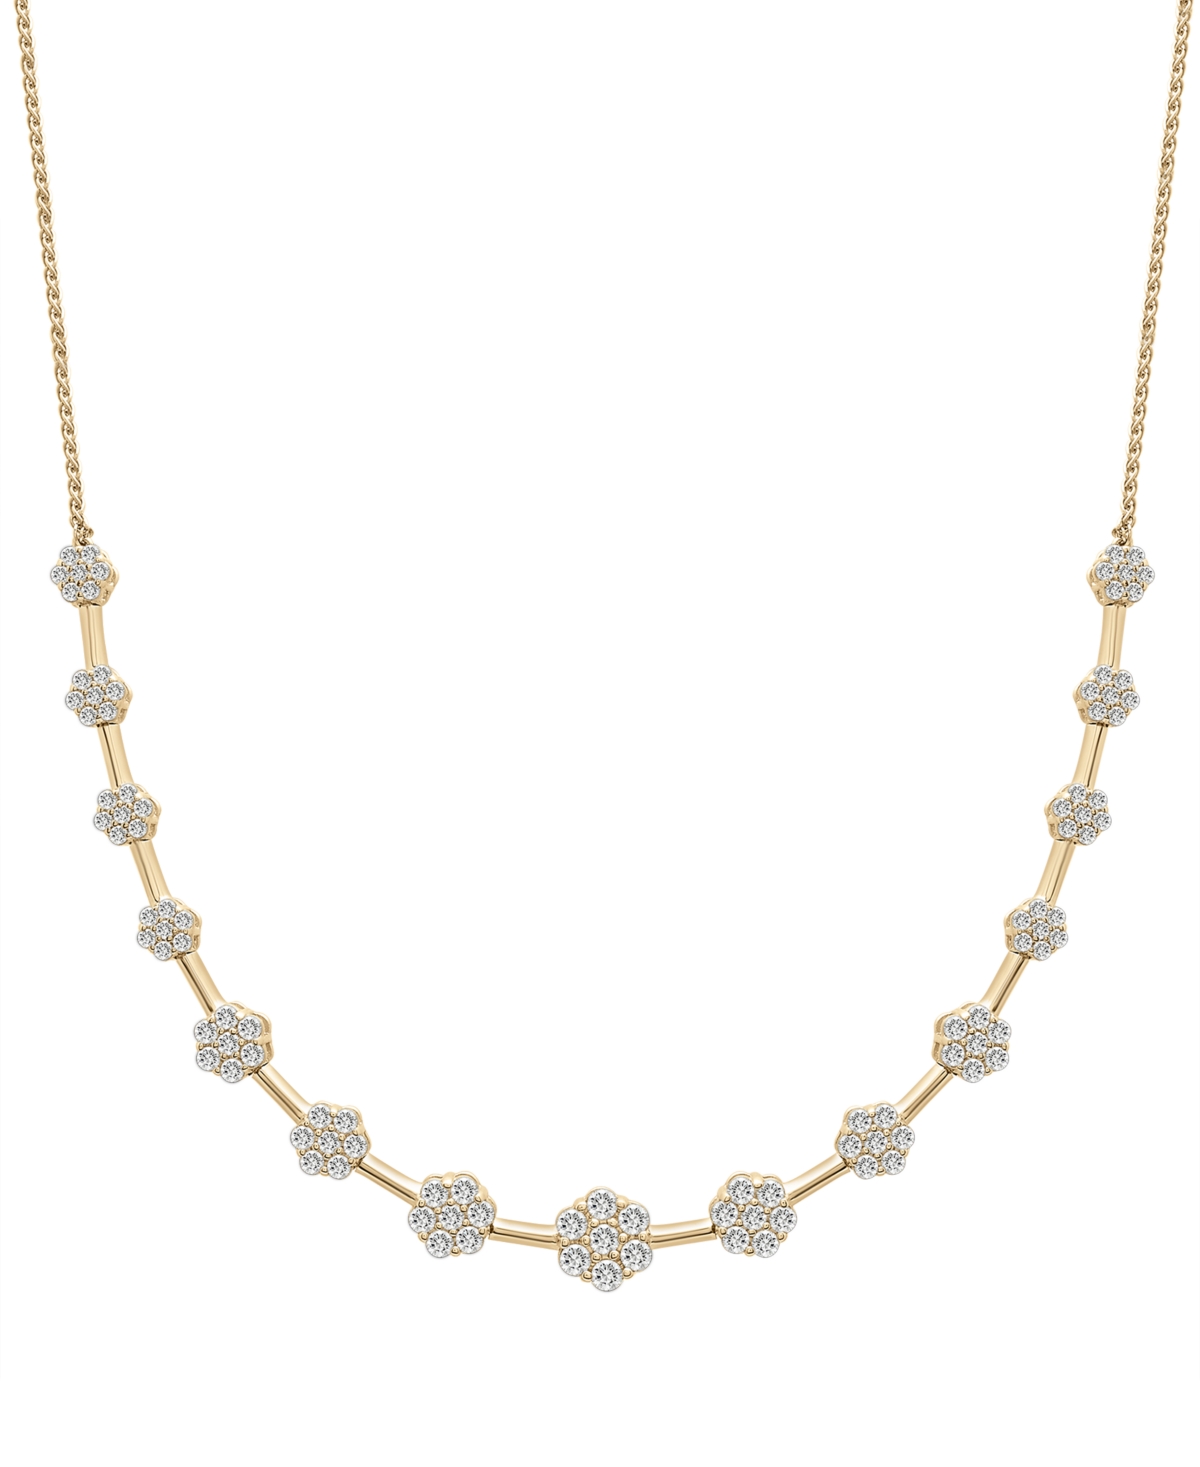 Diamond Flower Cluster Collar Necklace (2 ct. t.w.) in 14k Gold, 16" + 2" extender, Created for Macy's - Yellow Gold